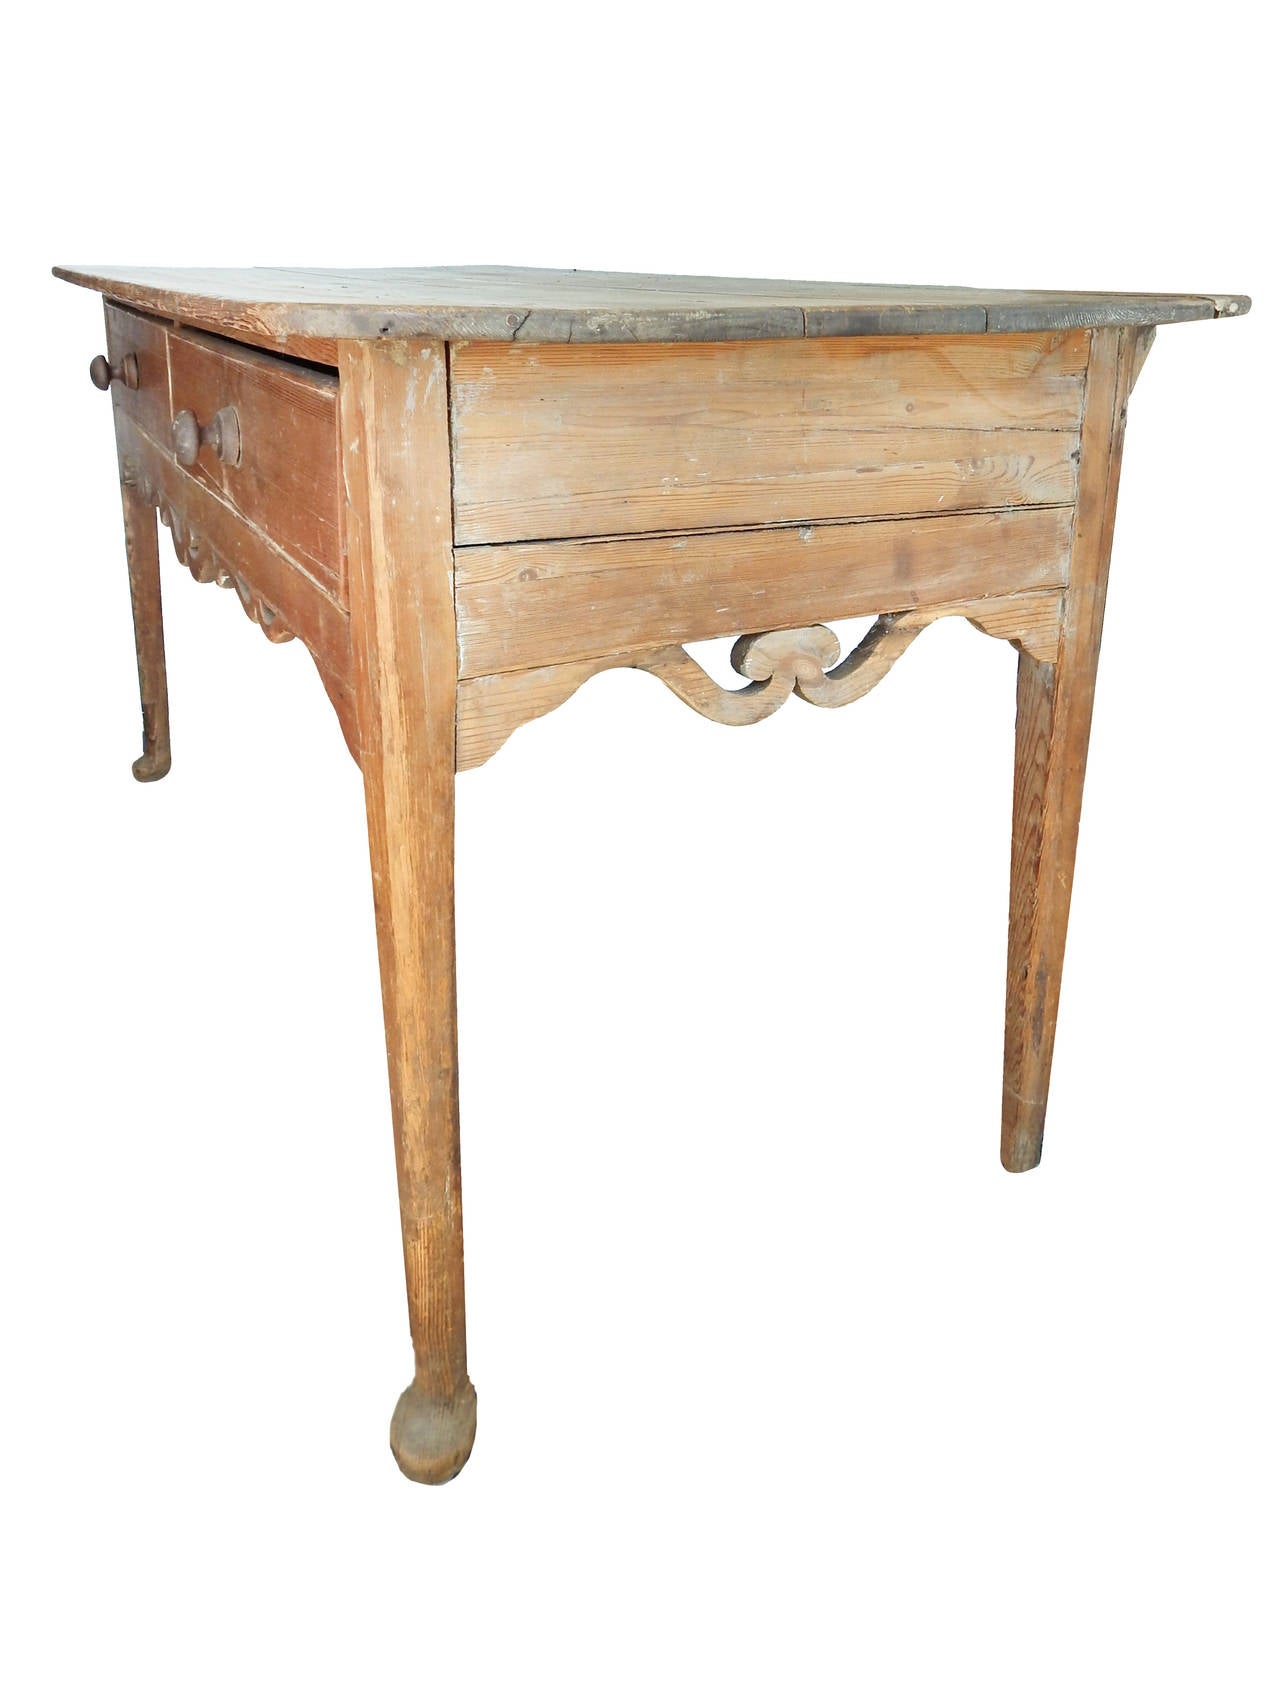 Late 19th Century European Table with Scroll Apron